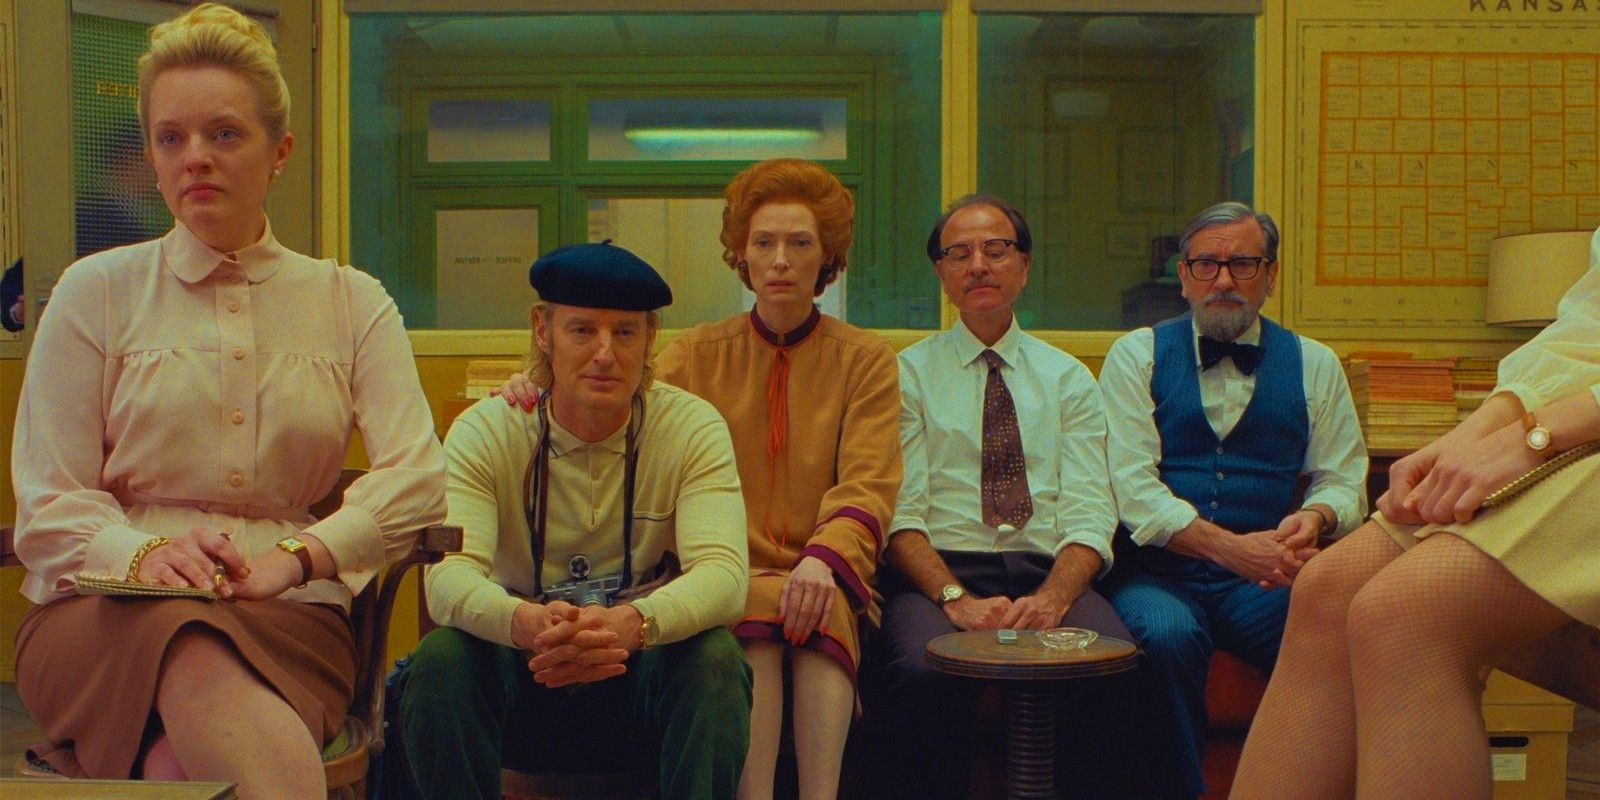 Elisabeth Moss, Owen Wilson, Tilda-Swinton, Fisher Stevens, and Griffin-Dunne from The French Dispatch